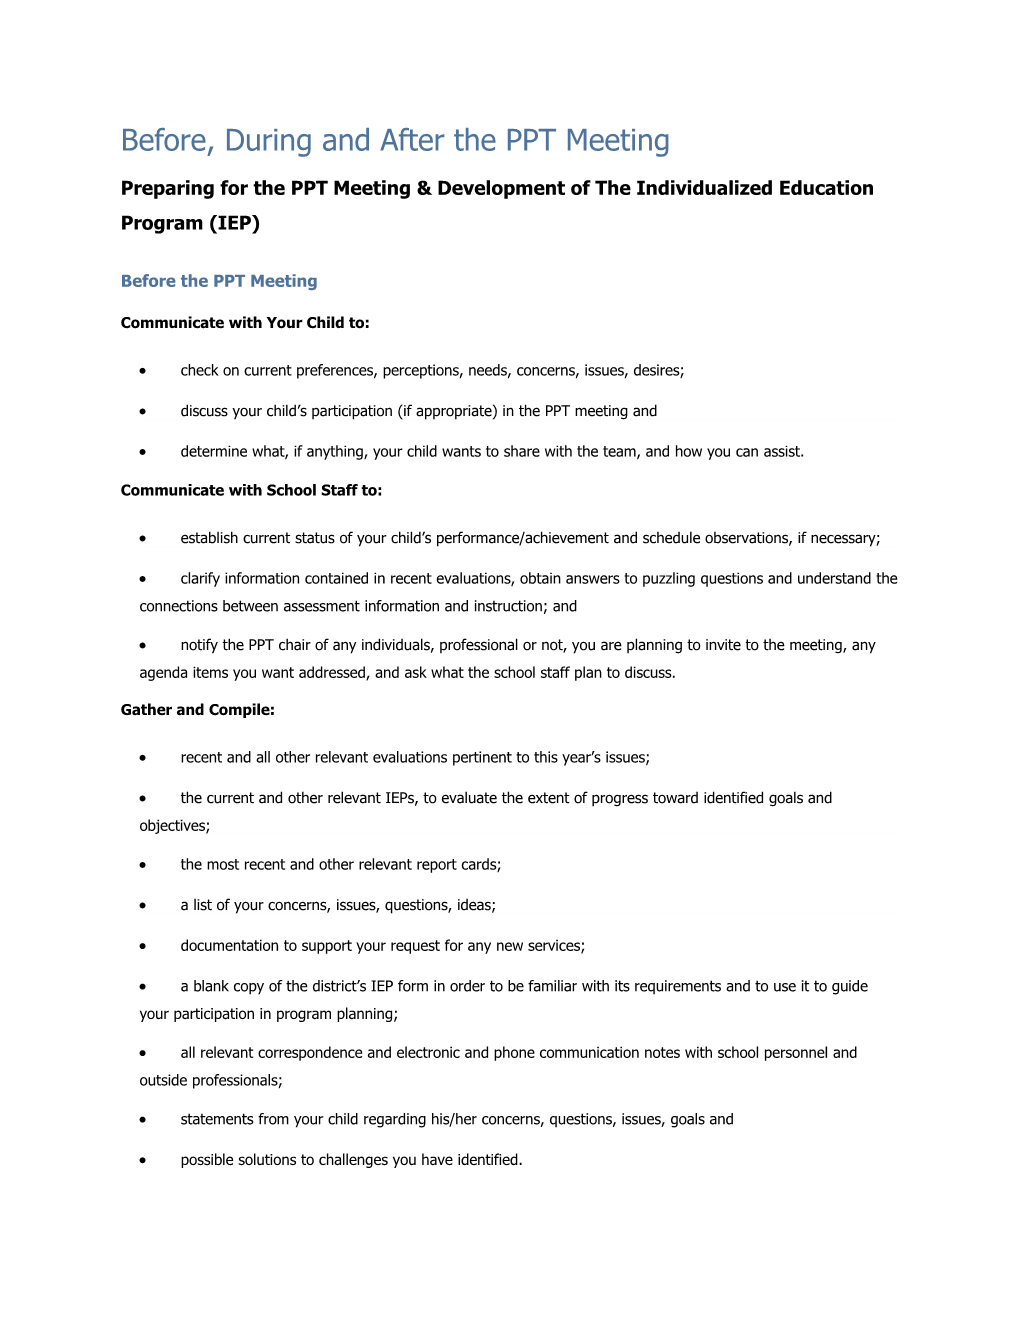 Preparing for the PPT Meeting & Development of the Individualized Education Program (IEP)